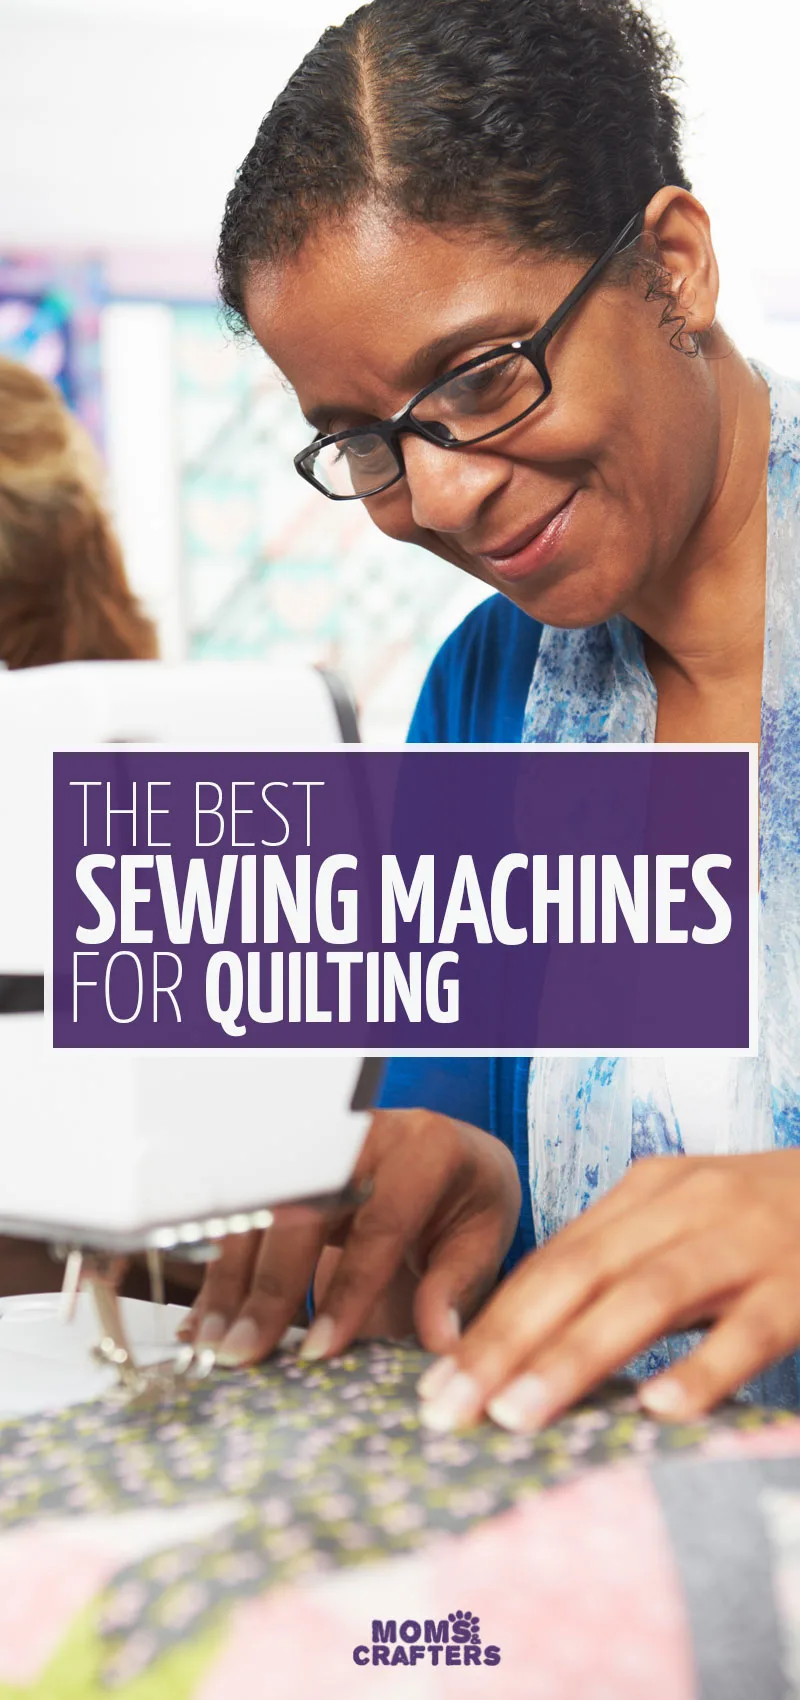 Click for reviews of the best sewing machine for quilting for every need and budget! This quilting for beginners tips helps you get the right sewing machine for your needs.